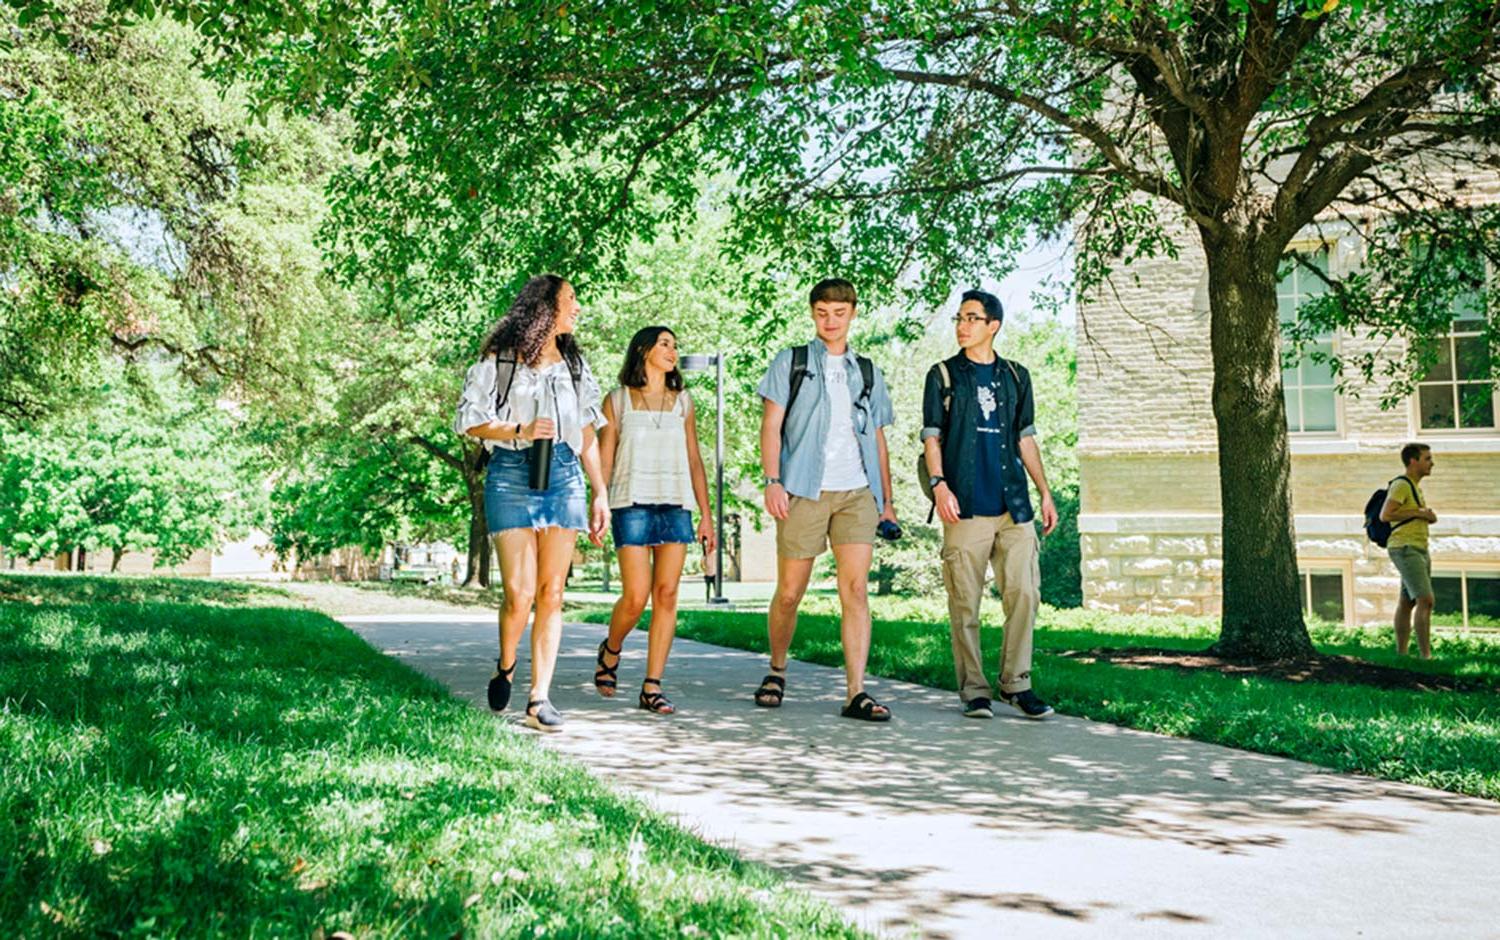 Students chat and walk through campus